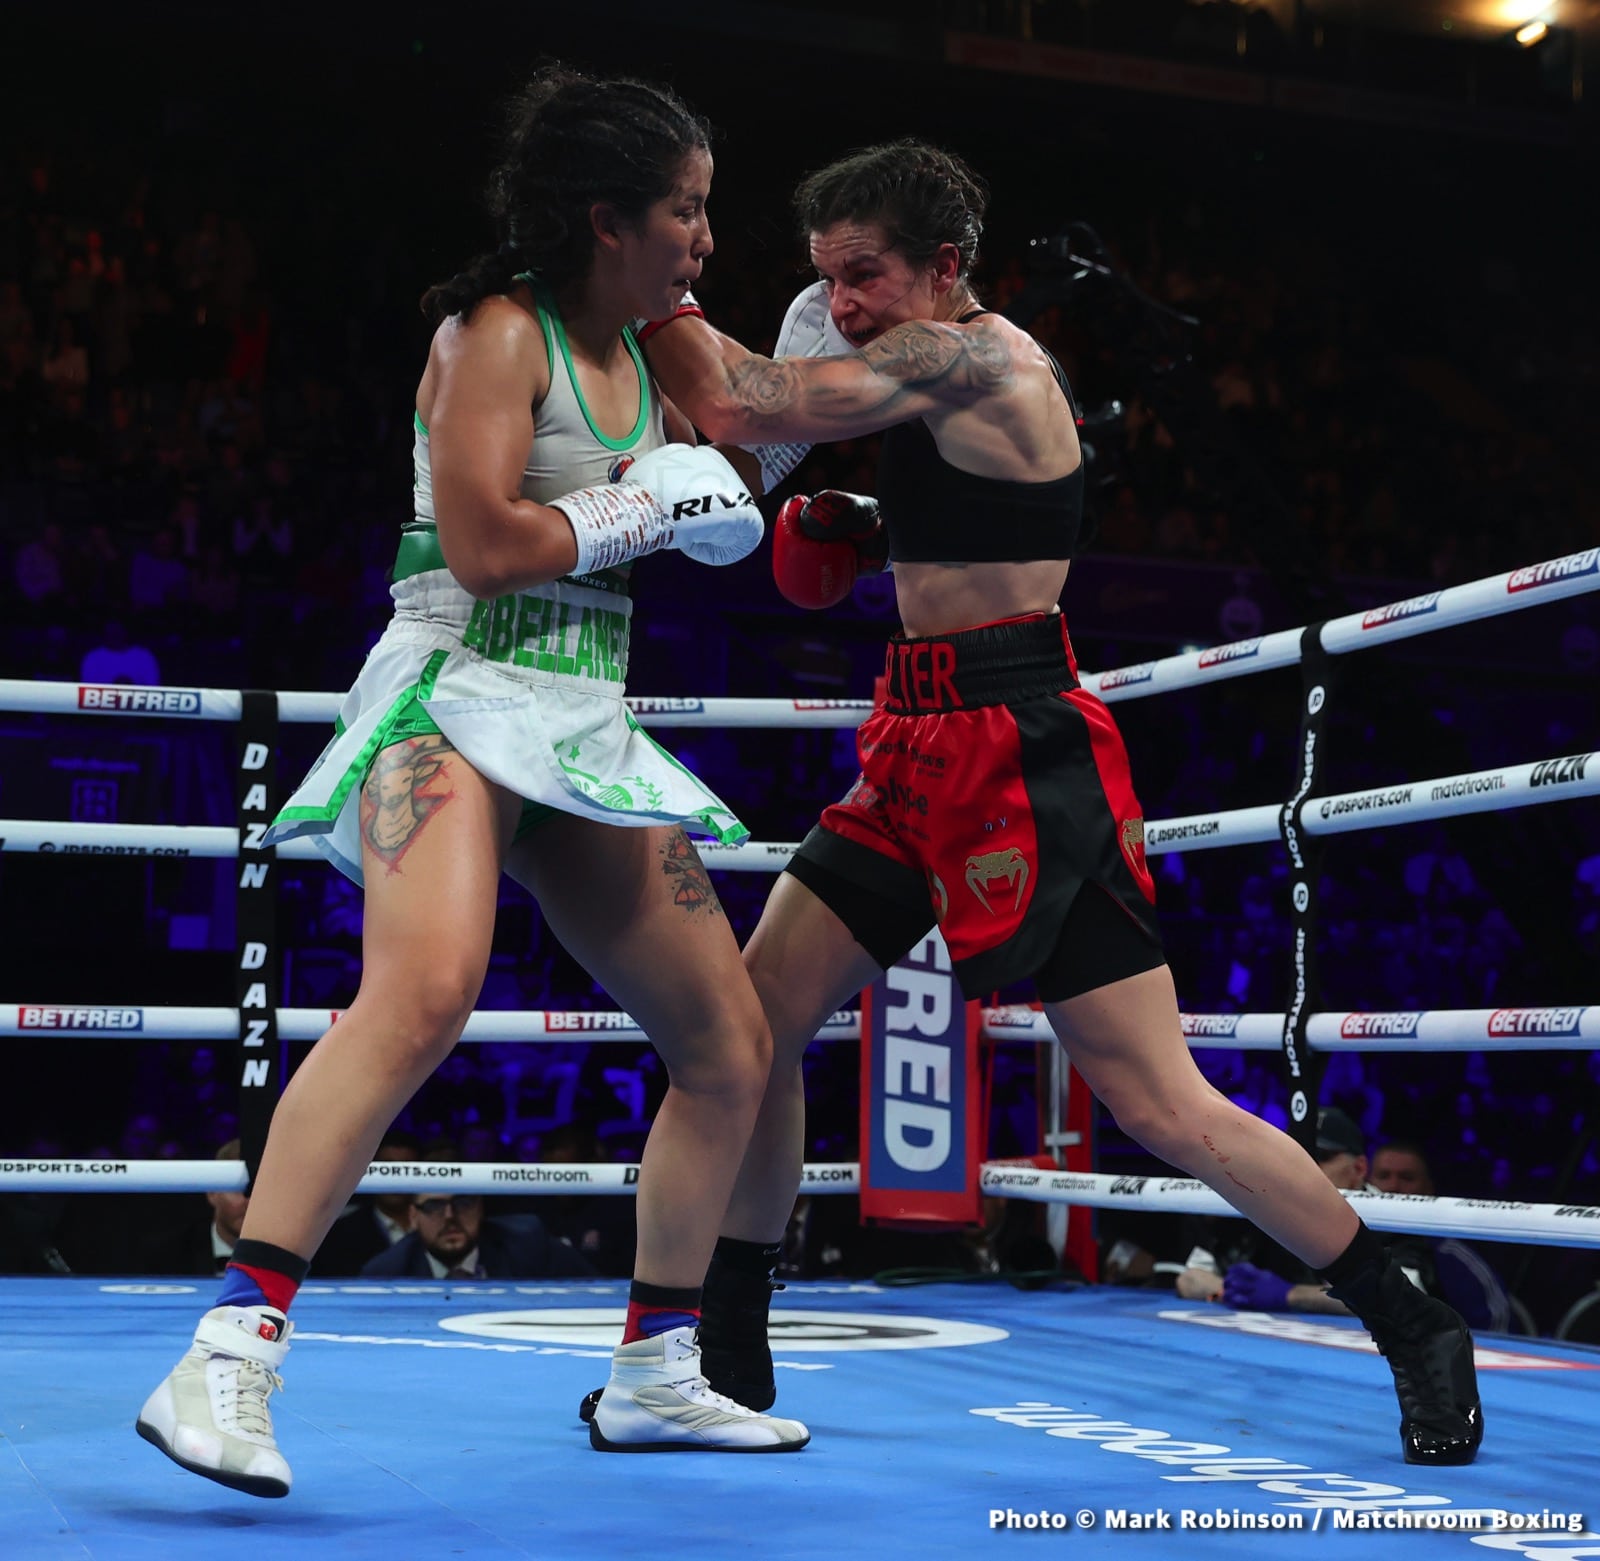 Leigh Wood vs. Michael Conlan - LIVE action results from Nottingham